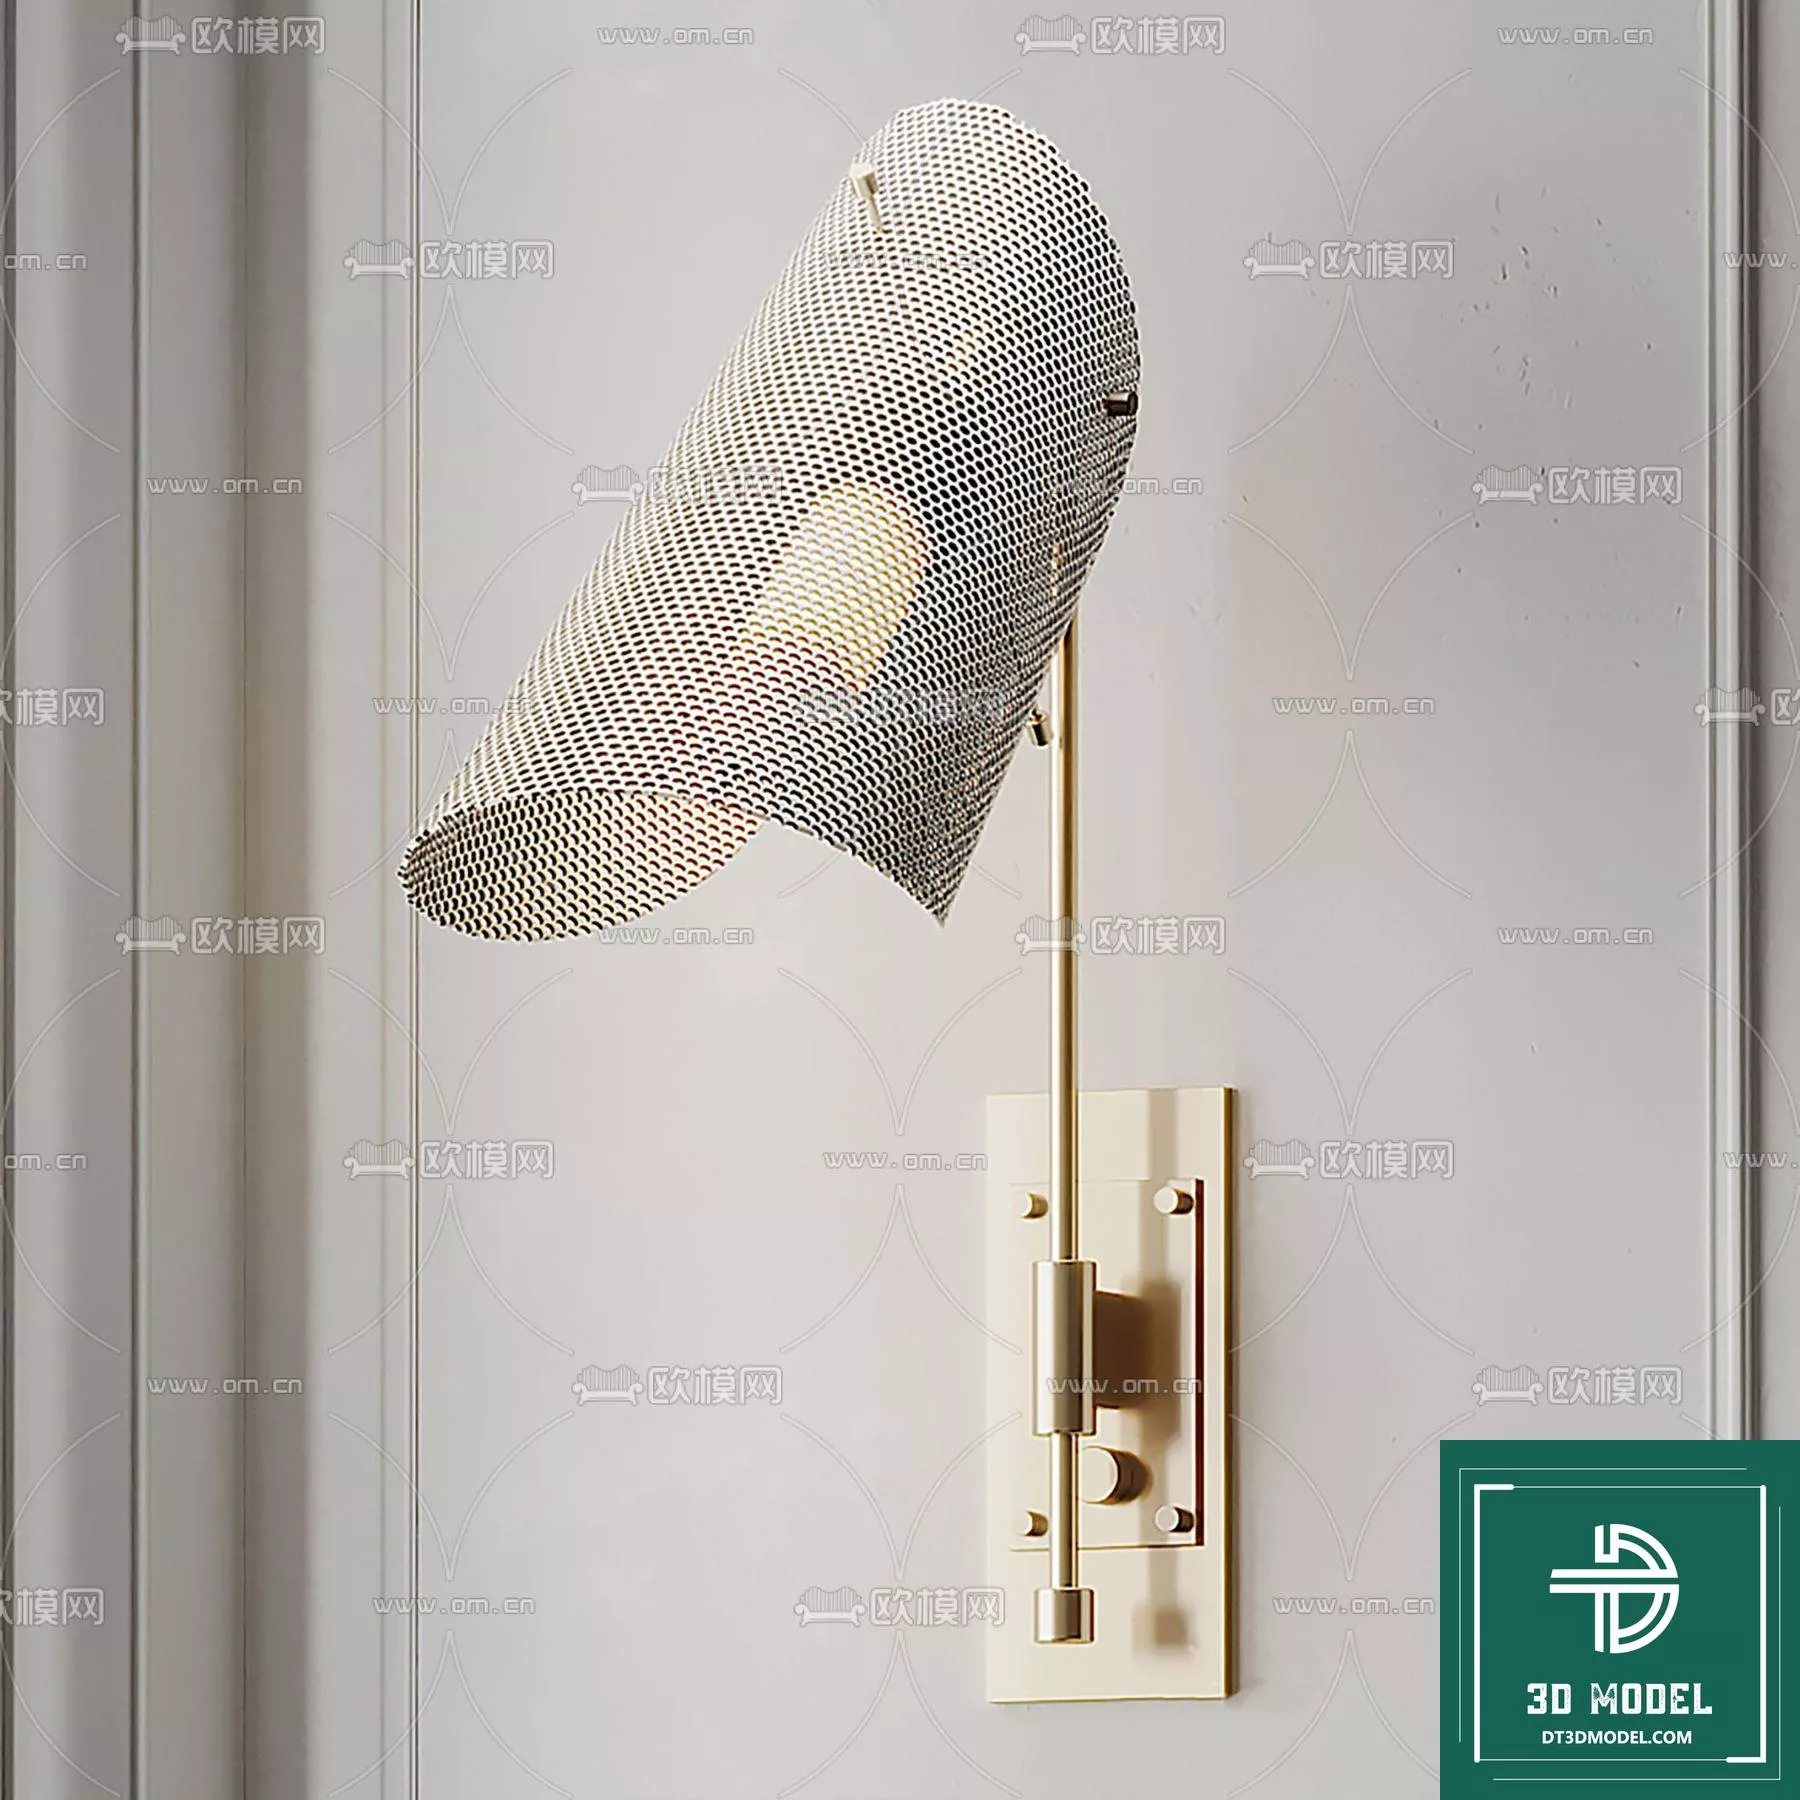 MODERN WALL LAMP - SKETCHUP 3D MODEL - VRAY OR ENSCAPE - ID16090